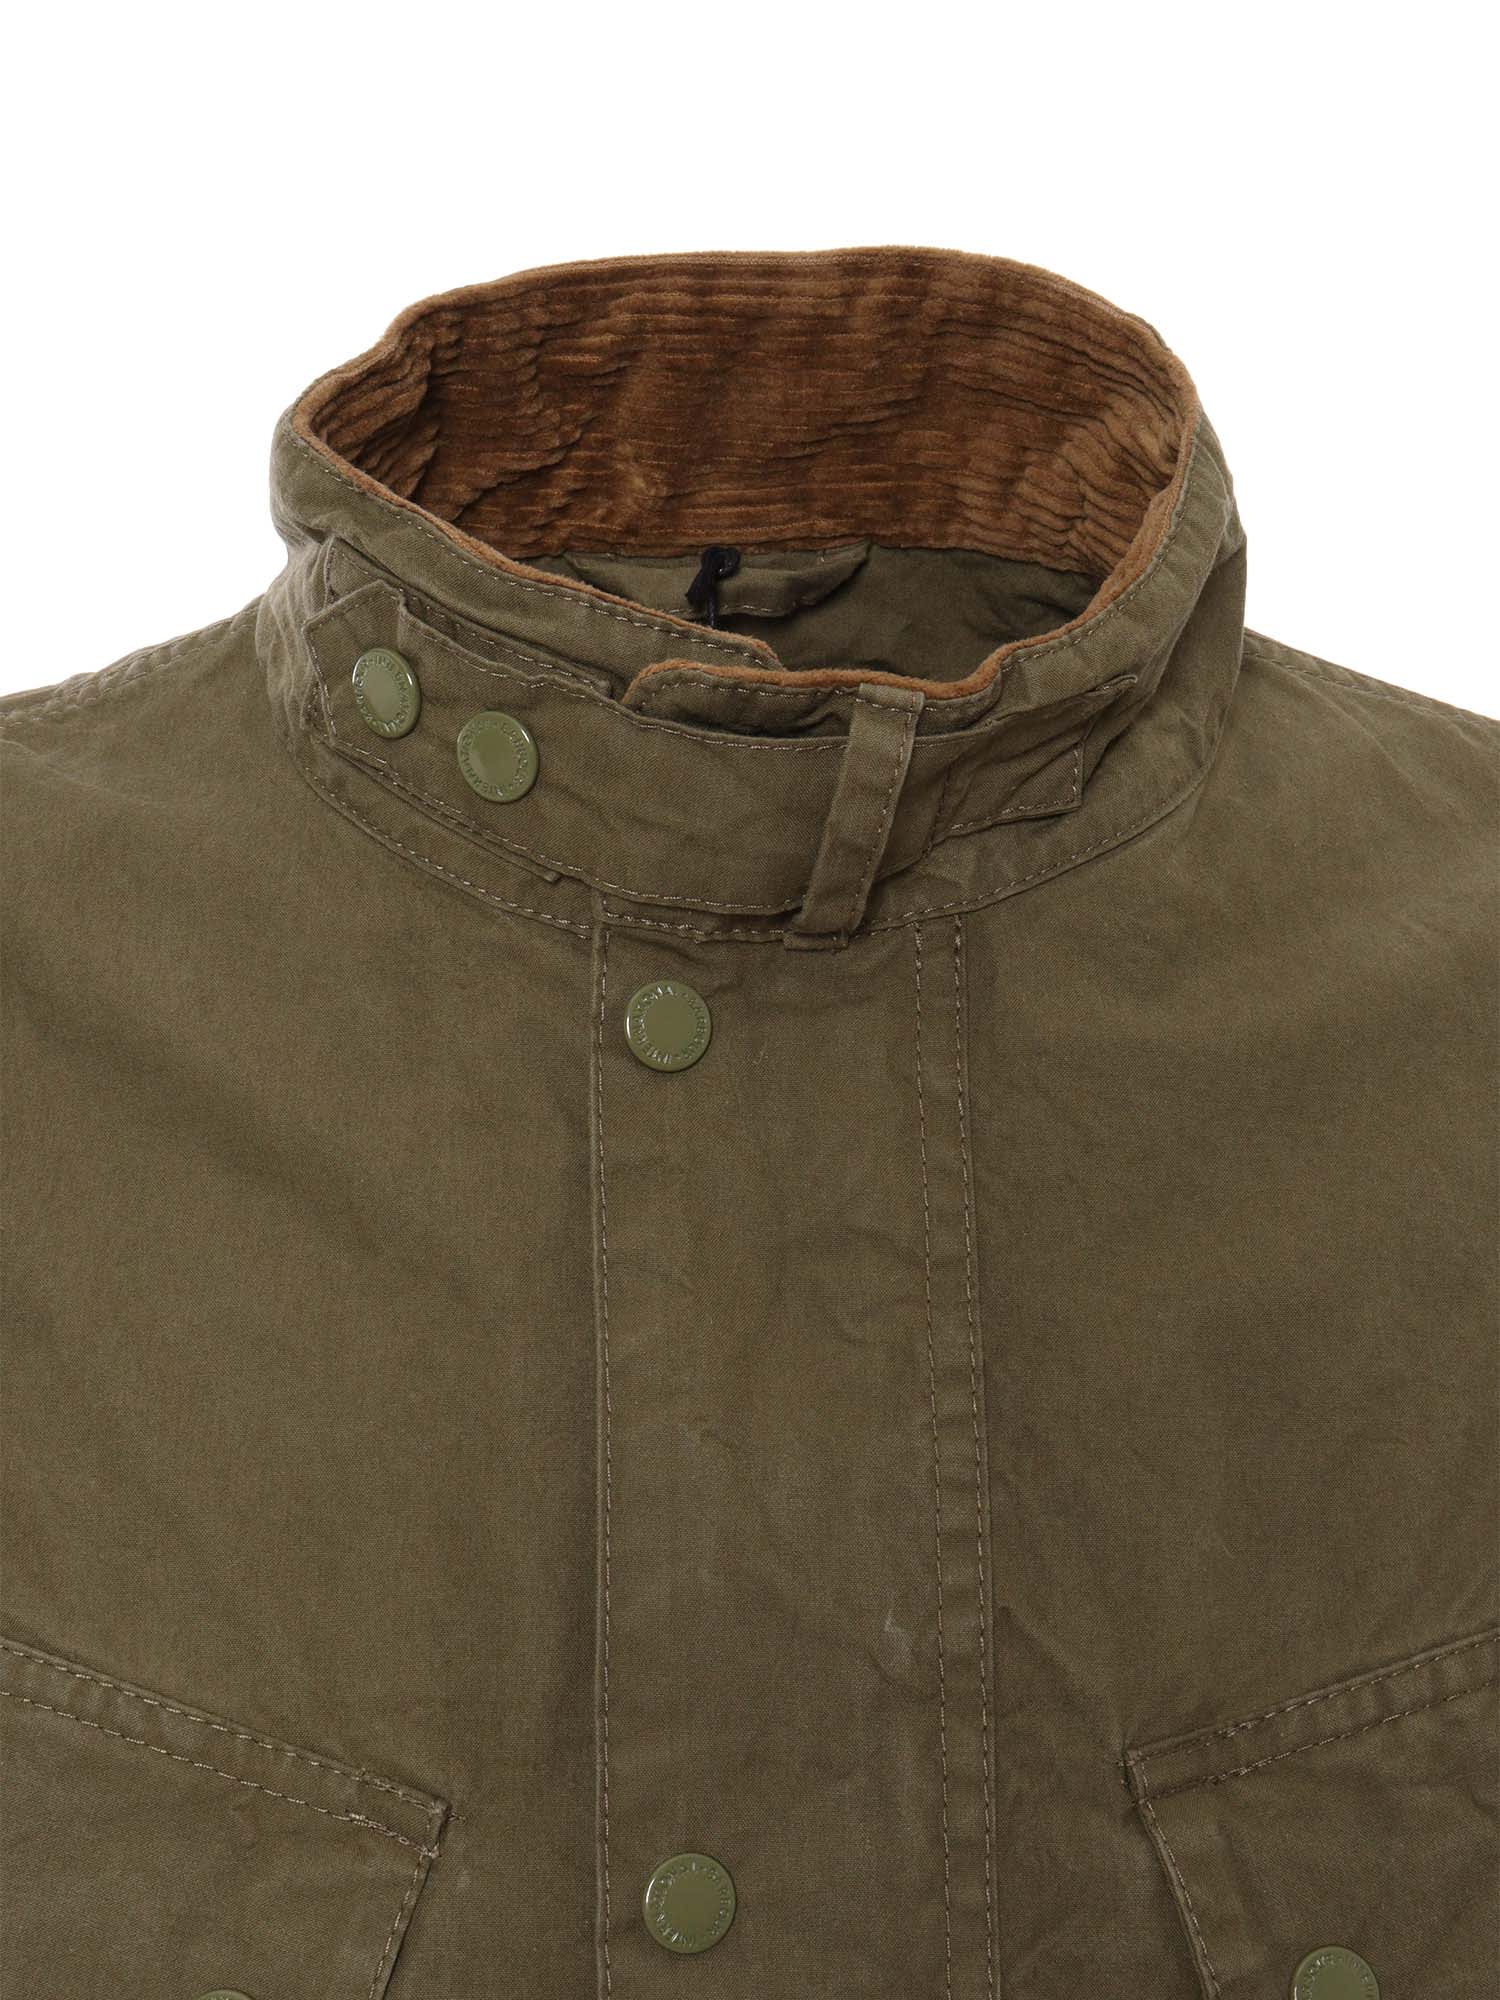 Shop Barbour Green Military Jacket